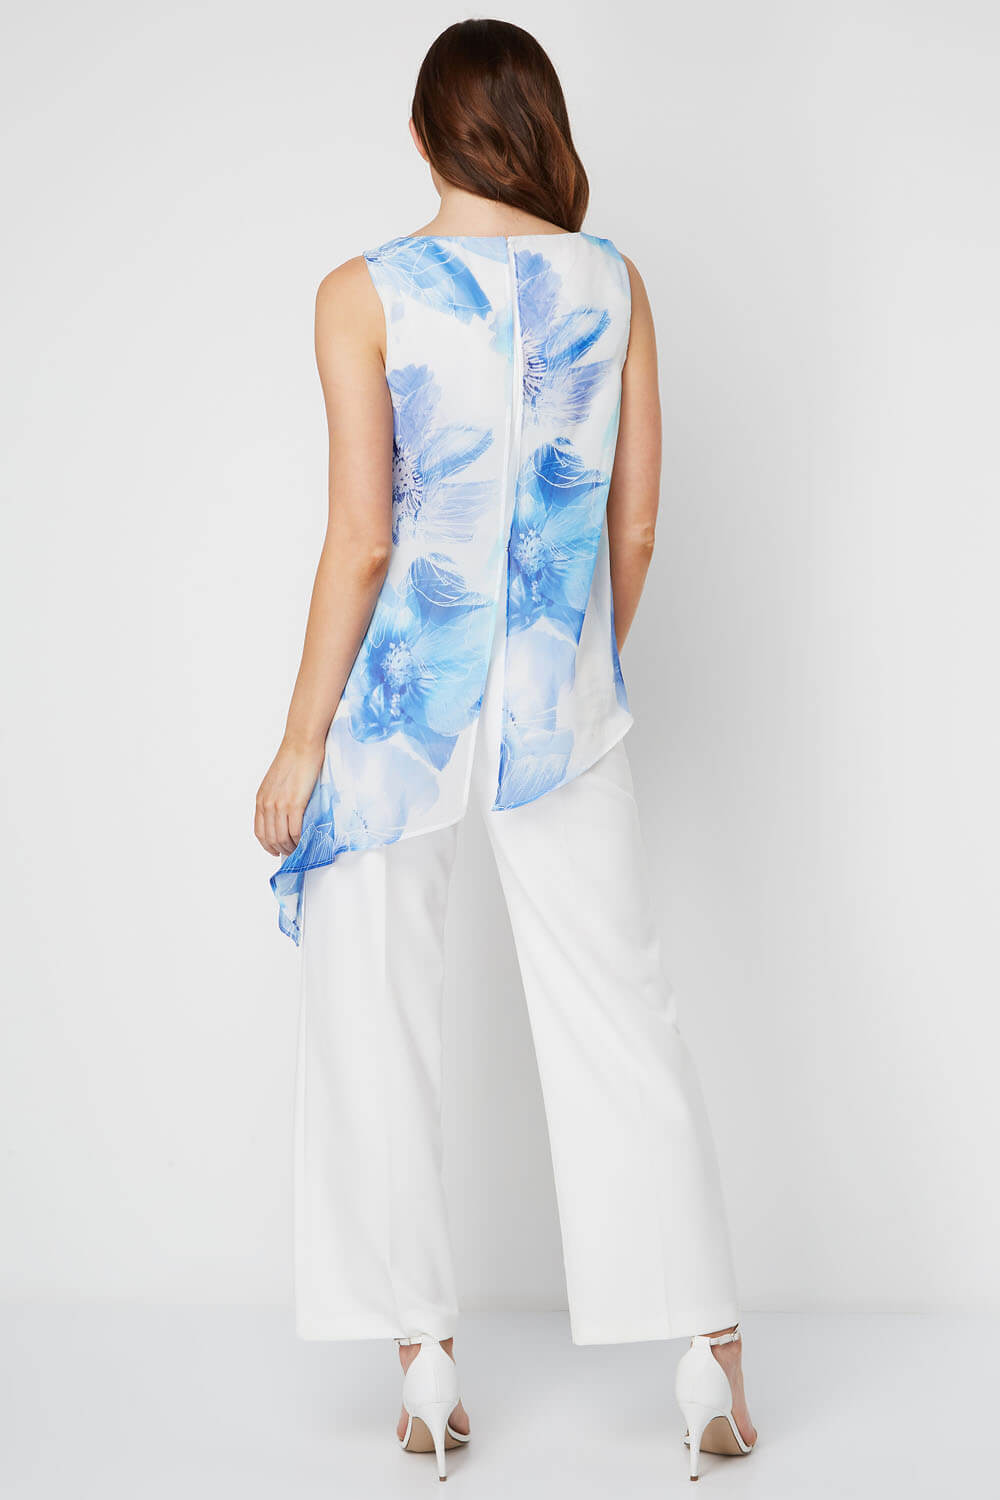 Royal Blue Floral Chiffon Overlay Jumpsuit, Image 2 of 4